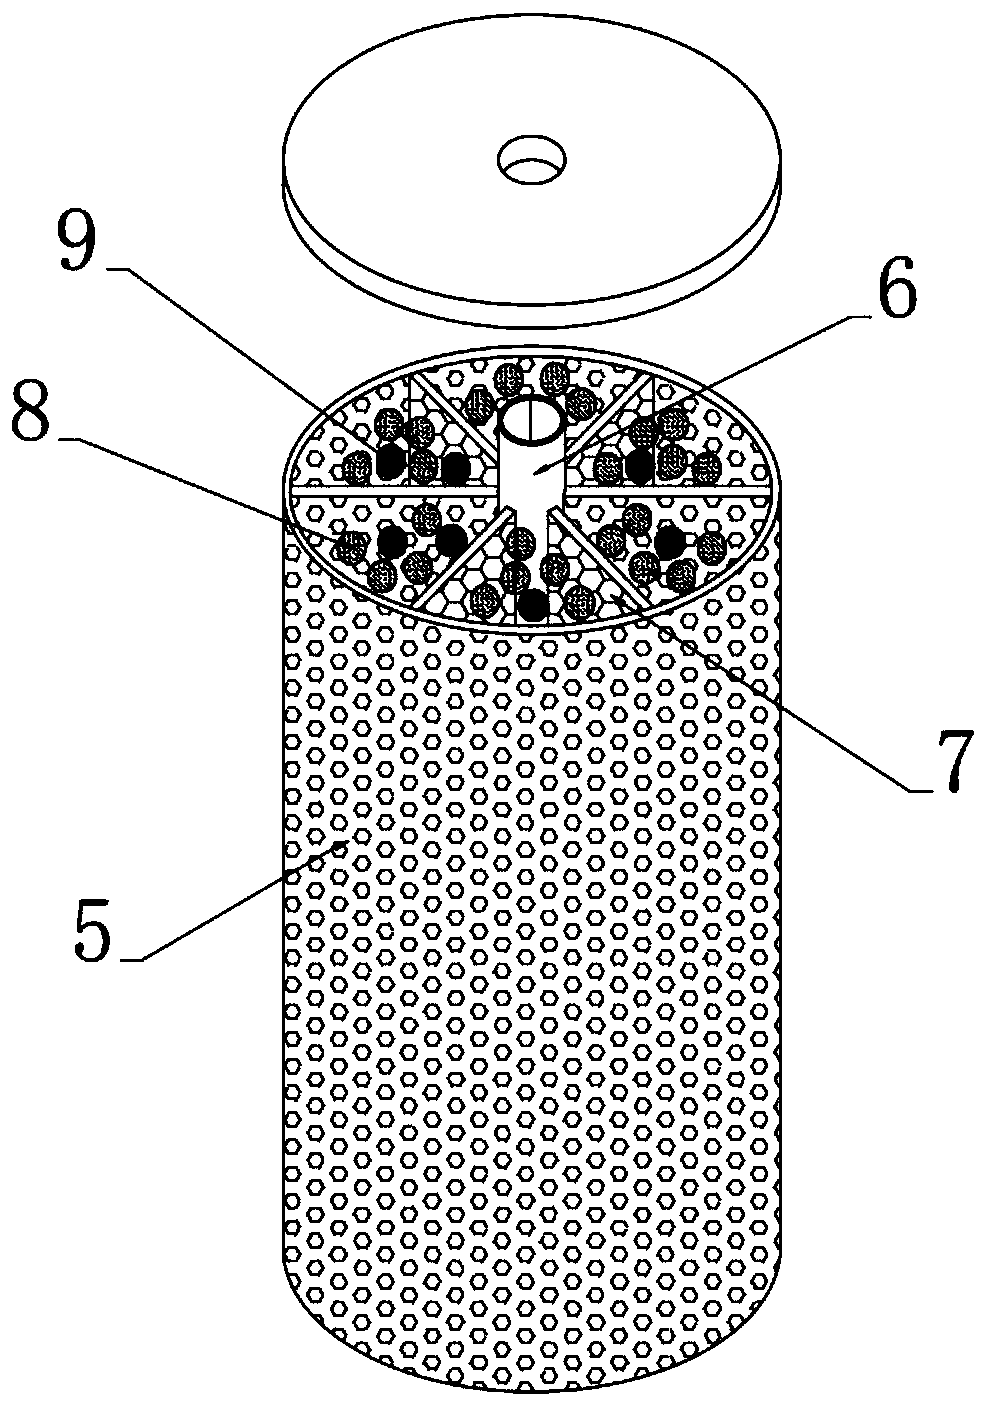 Organic matter adsorption and transfer device based on industrial waste gas treatment